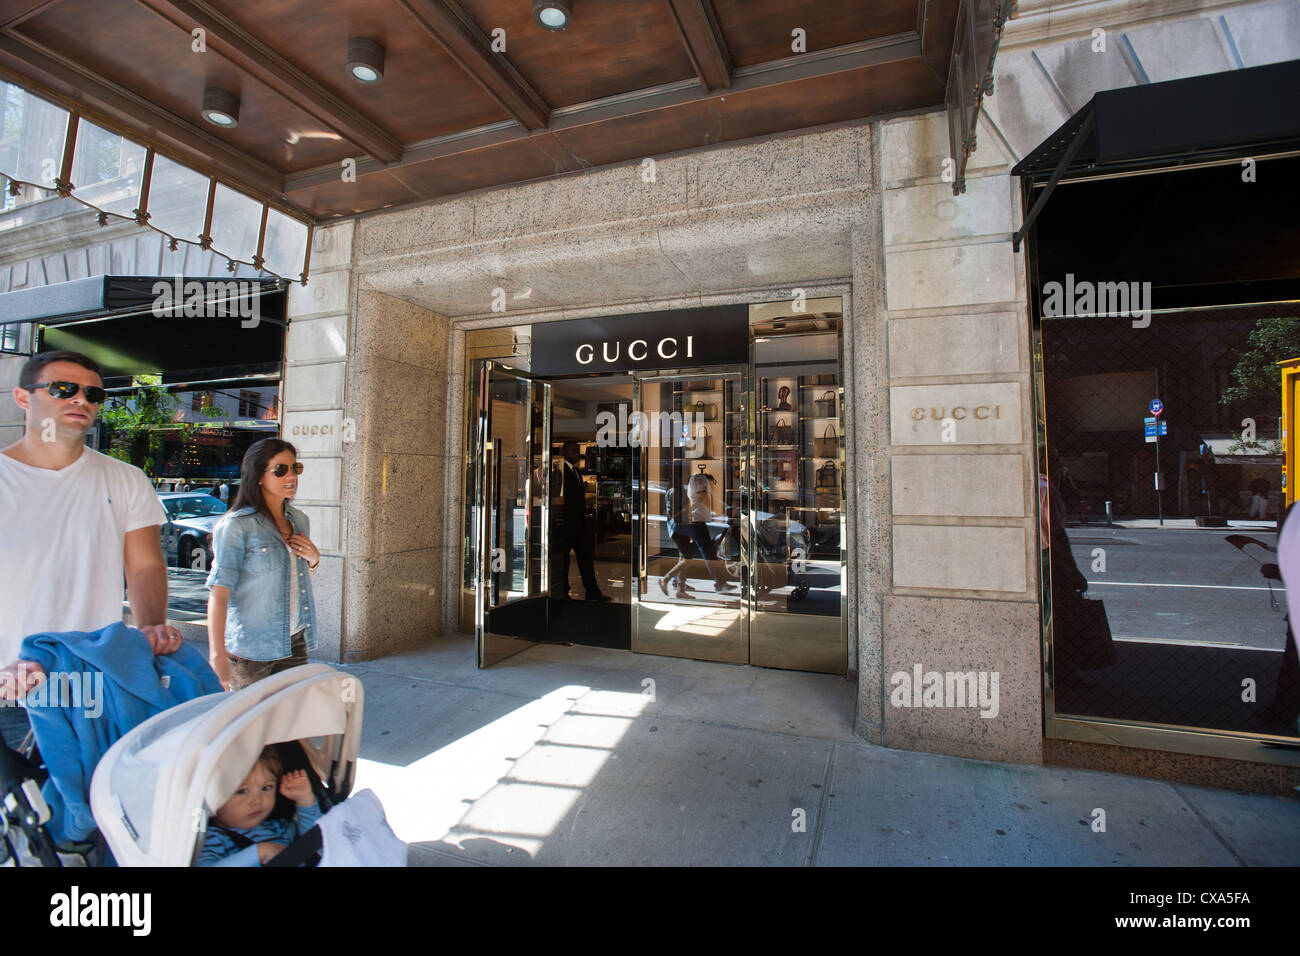 The Gucci store on Madison Avenue in New York Stock Photo: 50625662 - Alamy